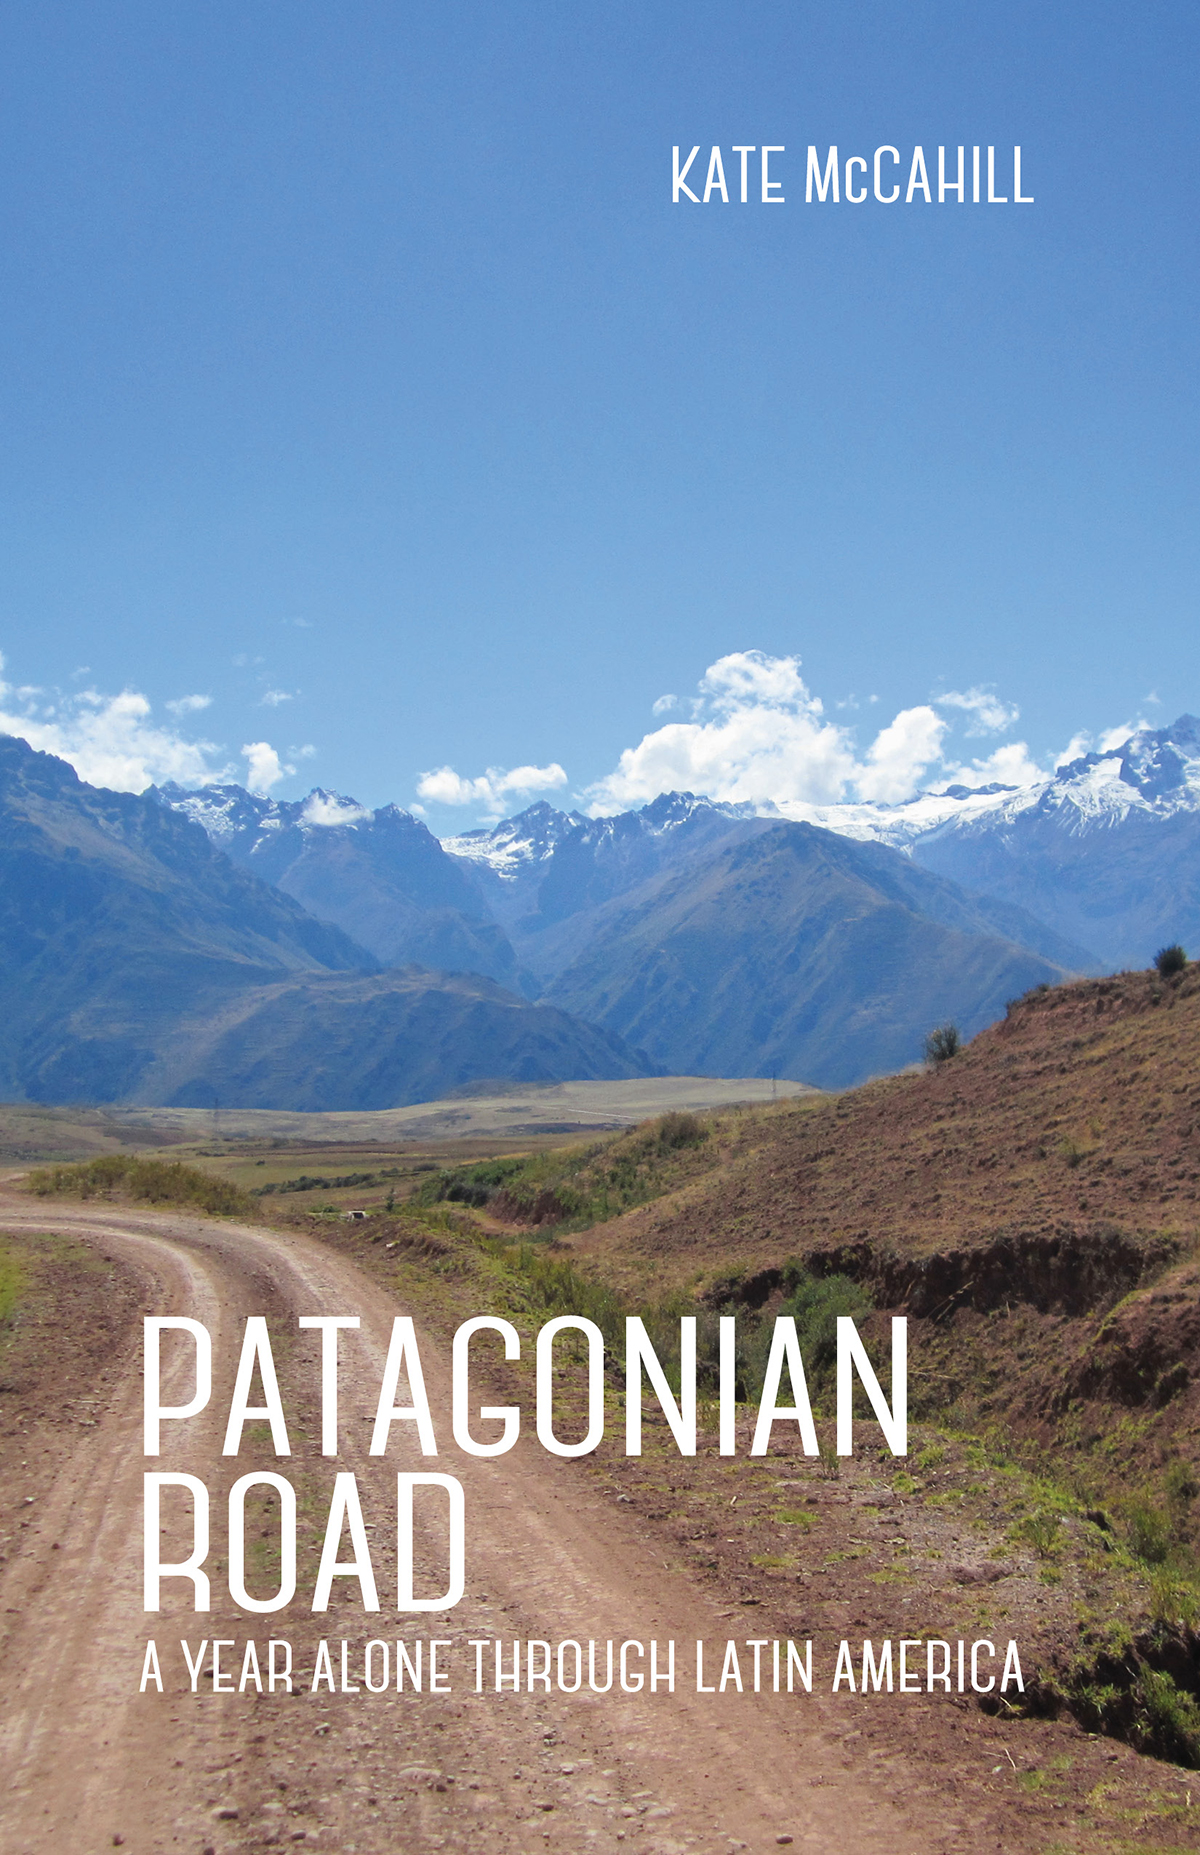 Goodreads Giveaway: PATAGONIAN ROAD